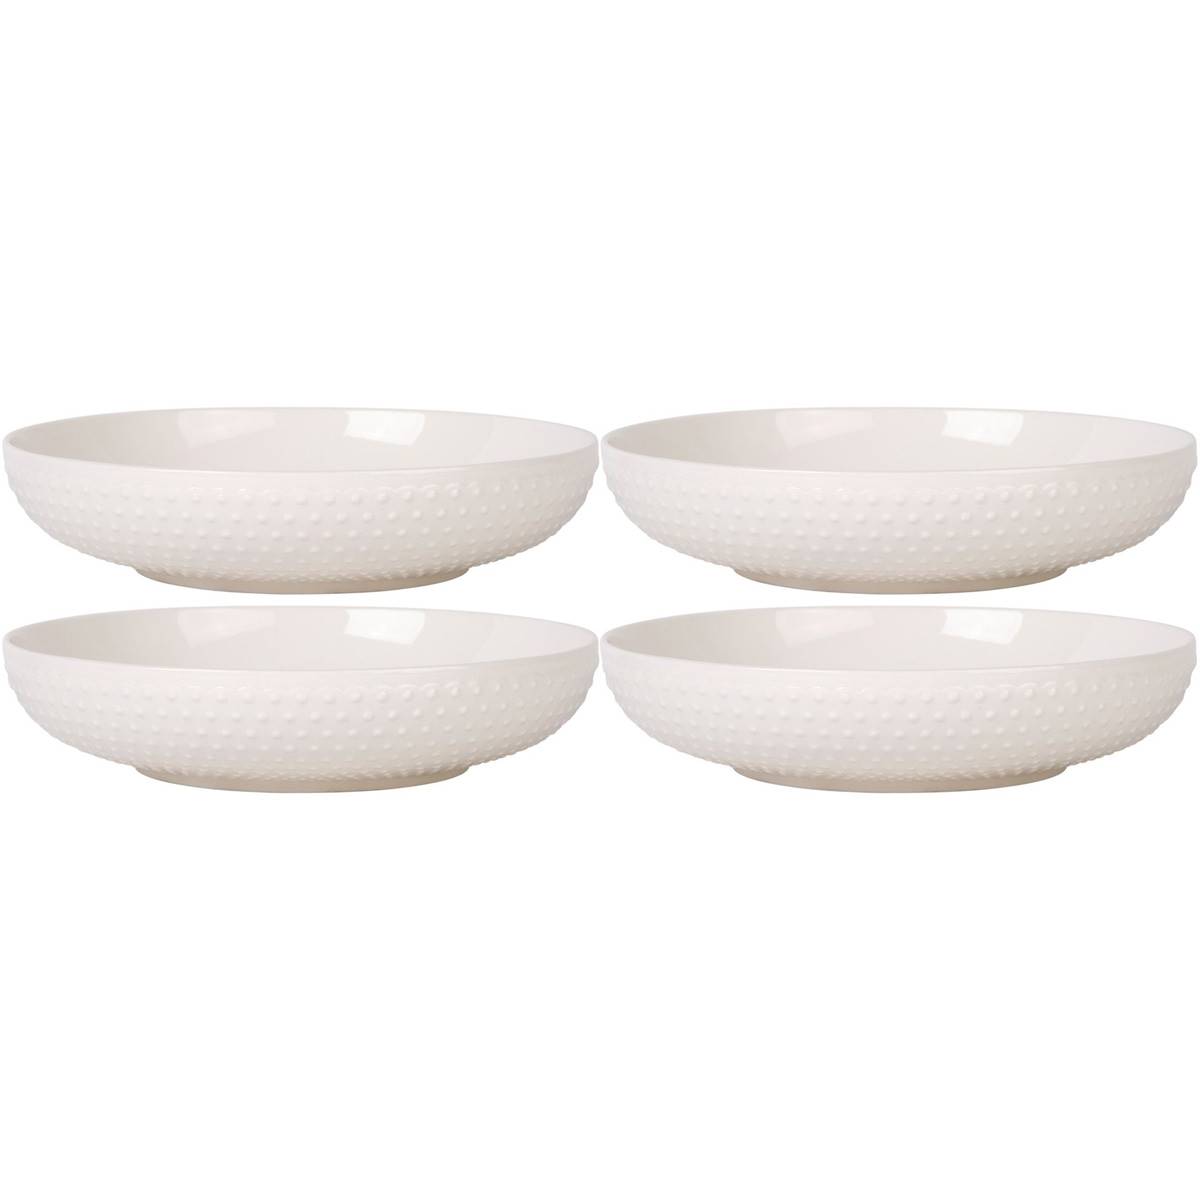 Home Essentials 8in. Hobnail Pasta Bowls - Set Of 4